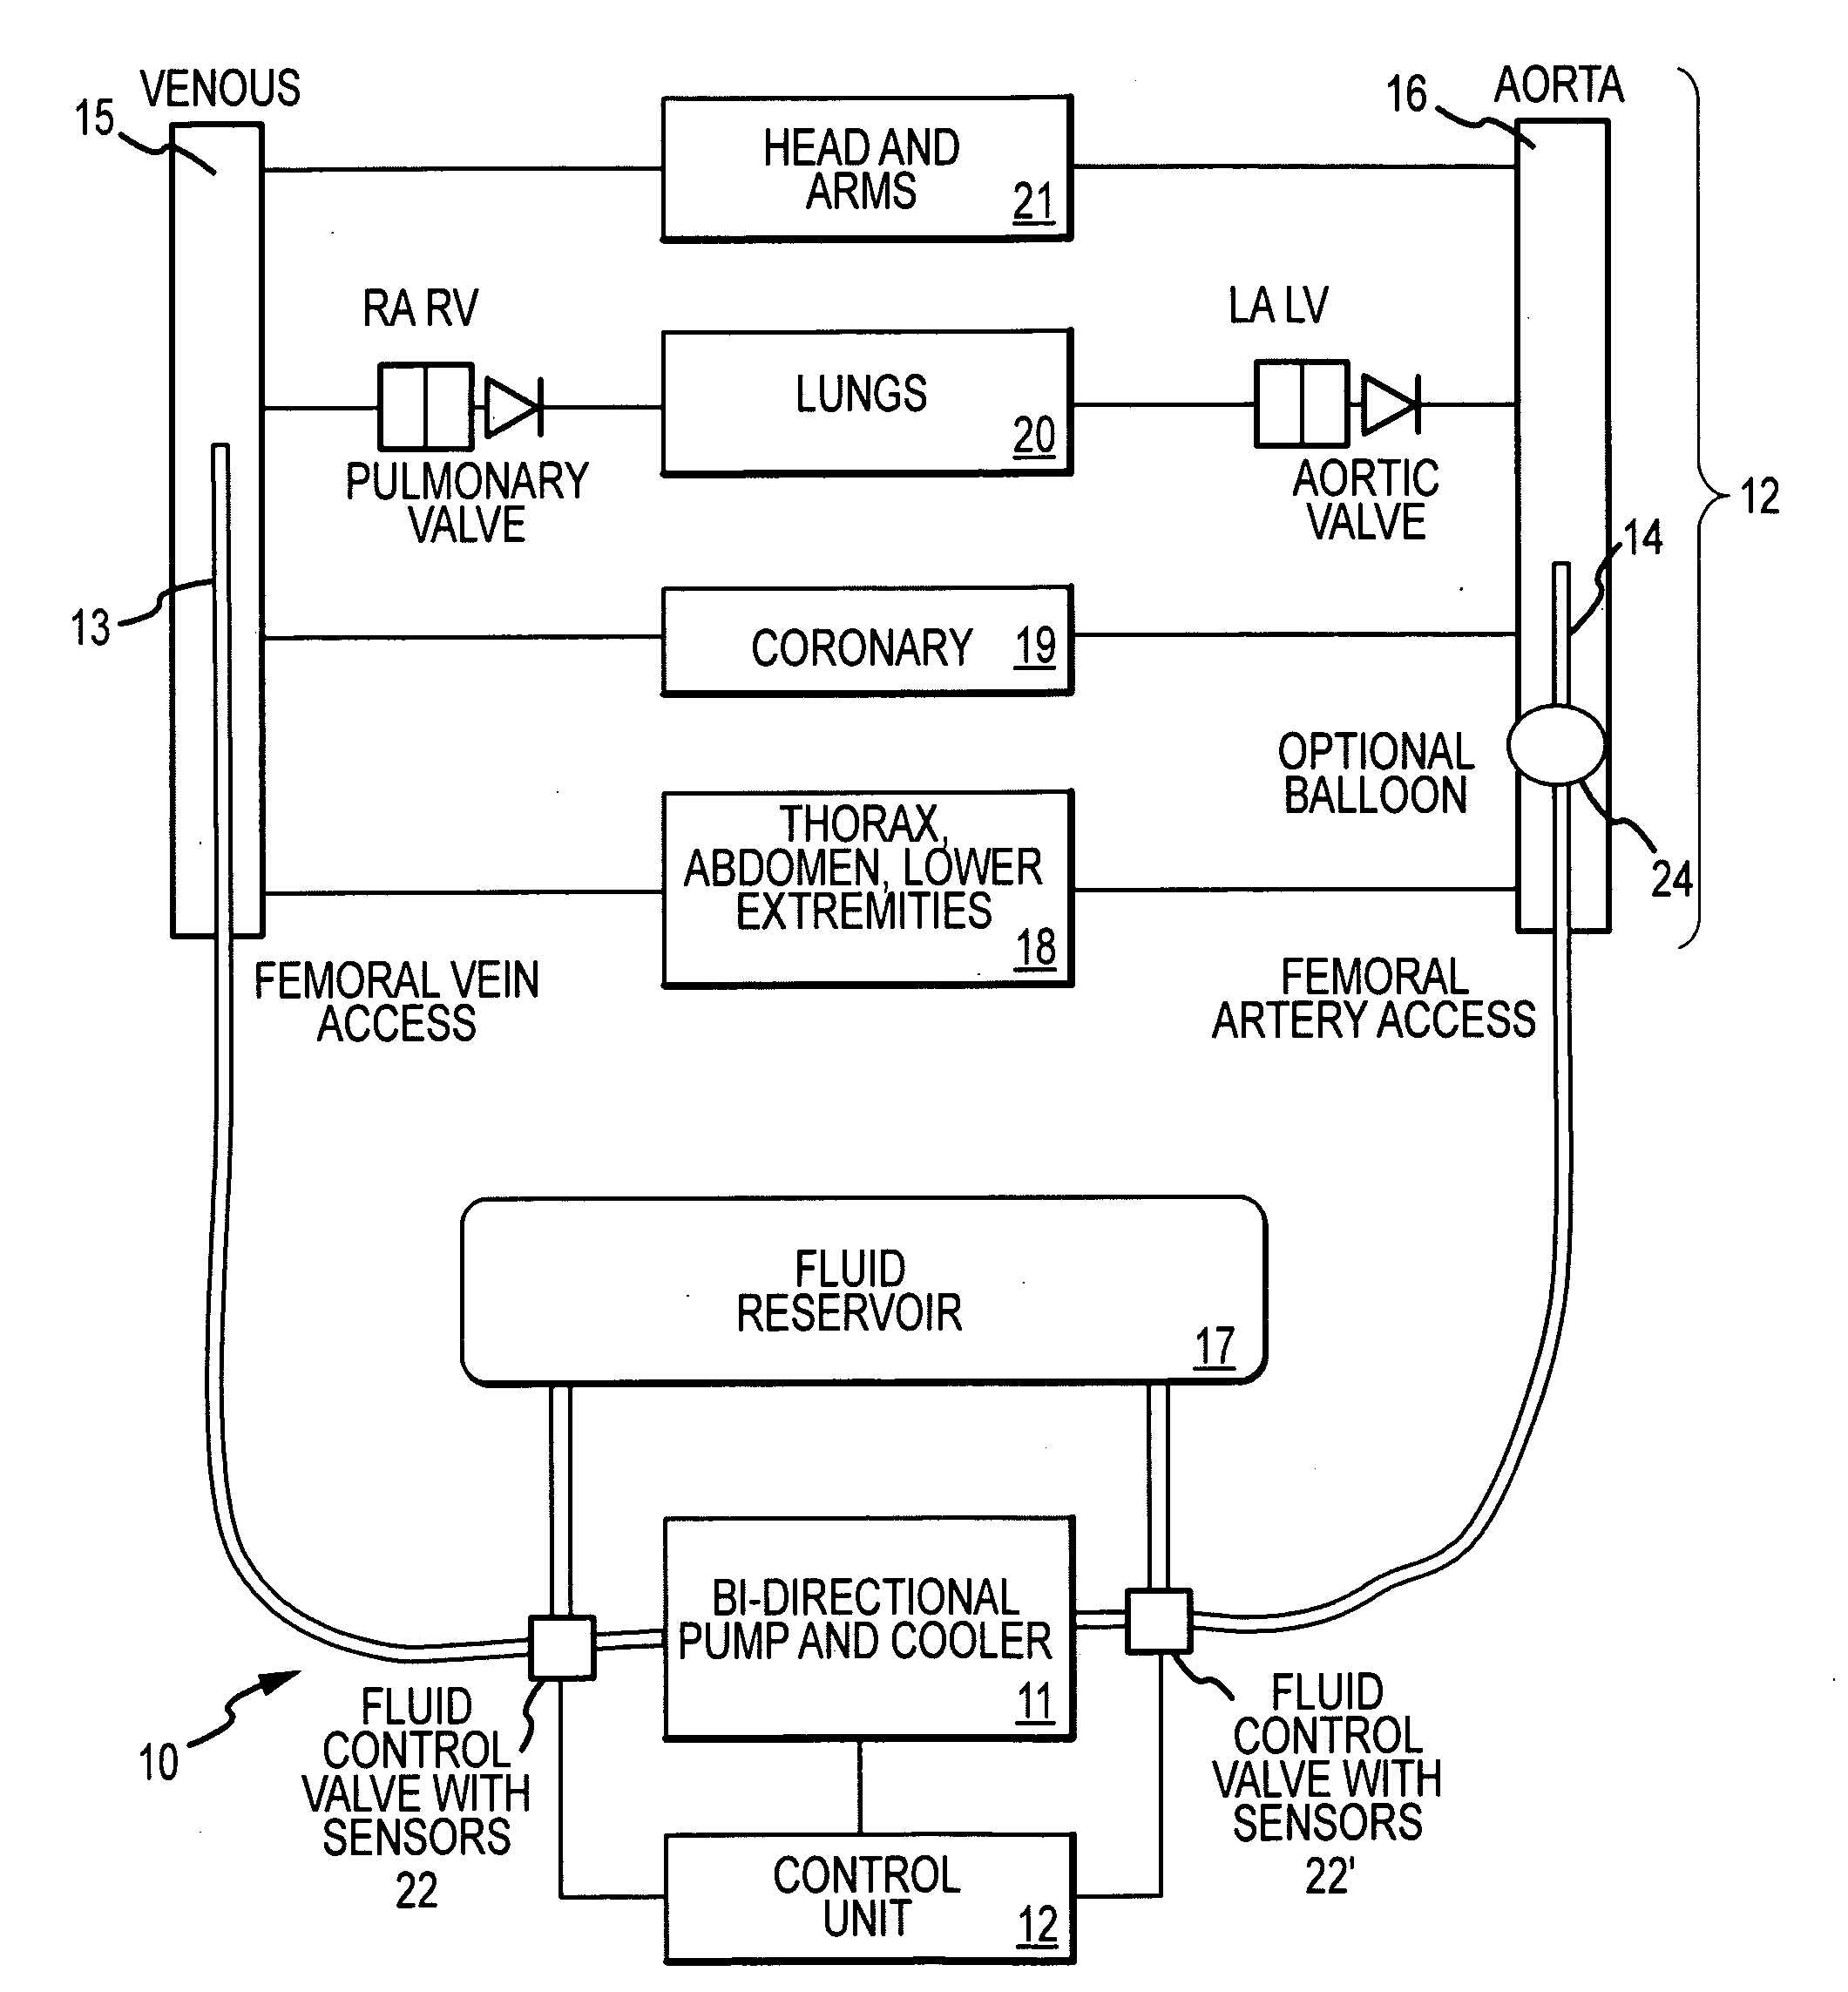 Cardiopulmonary bypass devices and methods